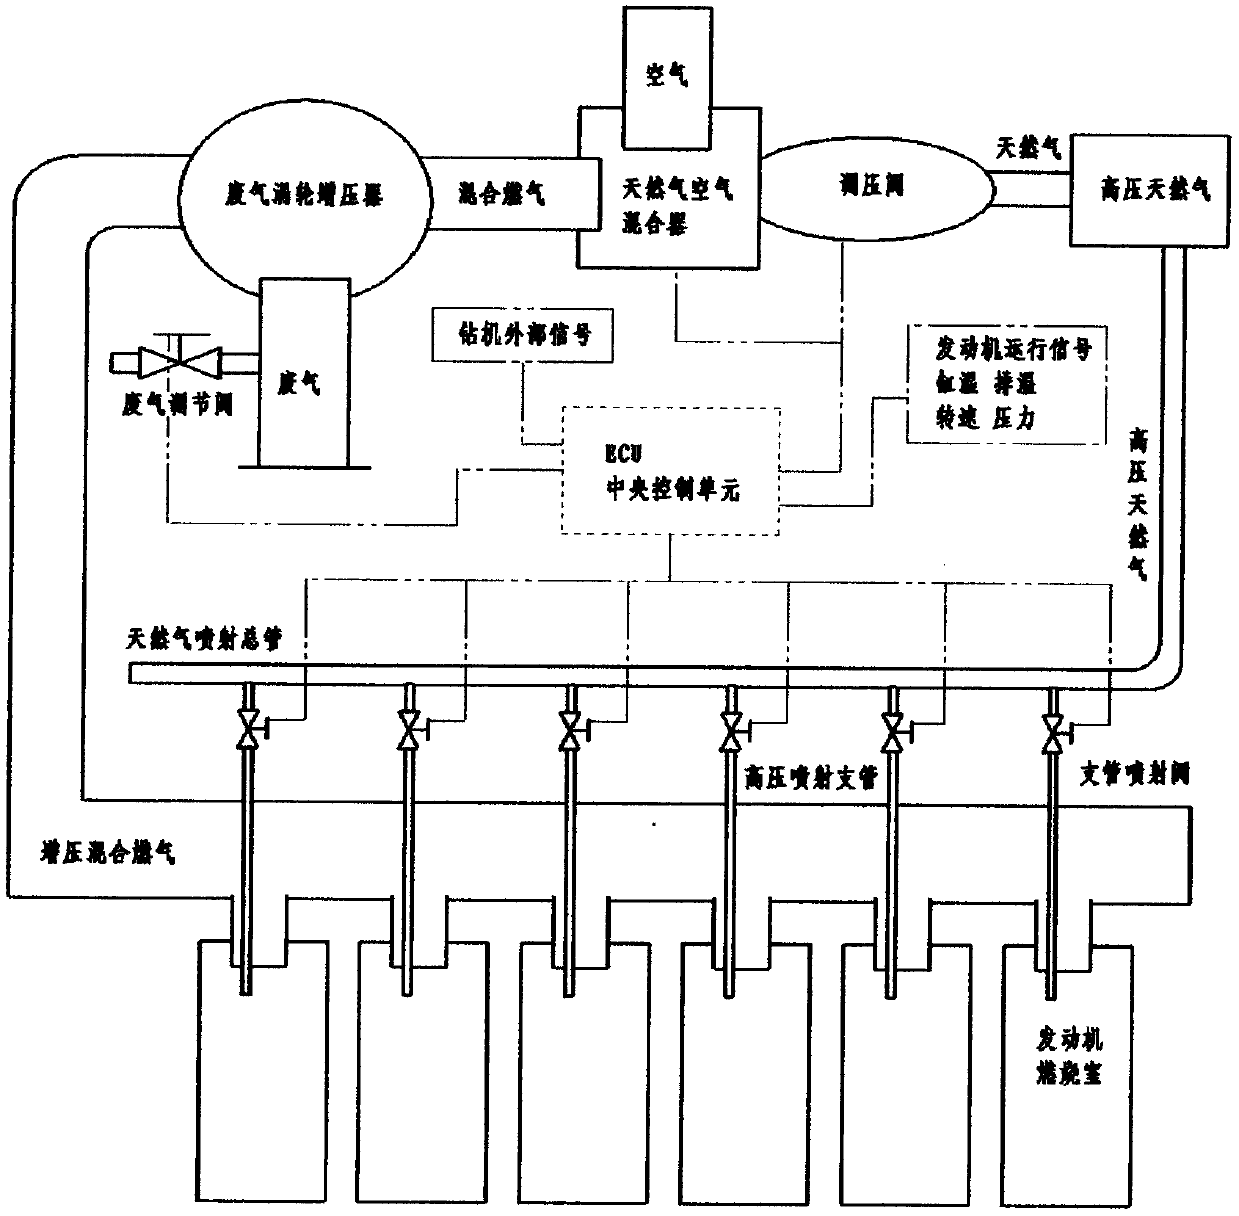 Gas engine for realizing rapid power response by utilizing electronic fuel injection